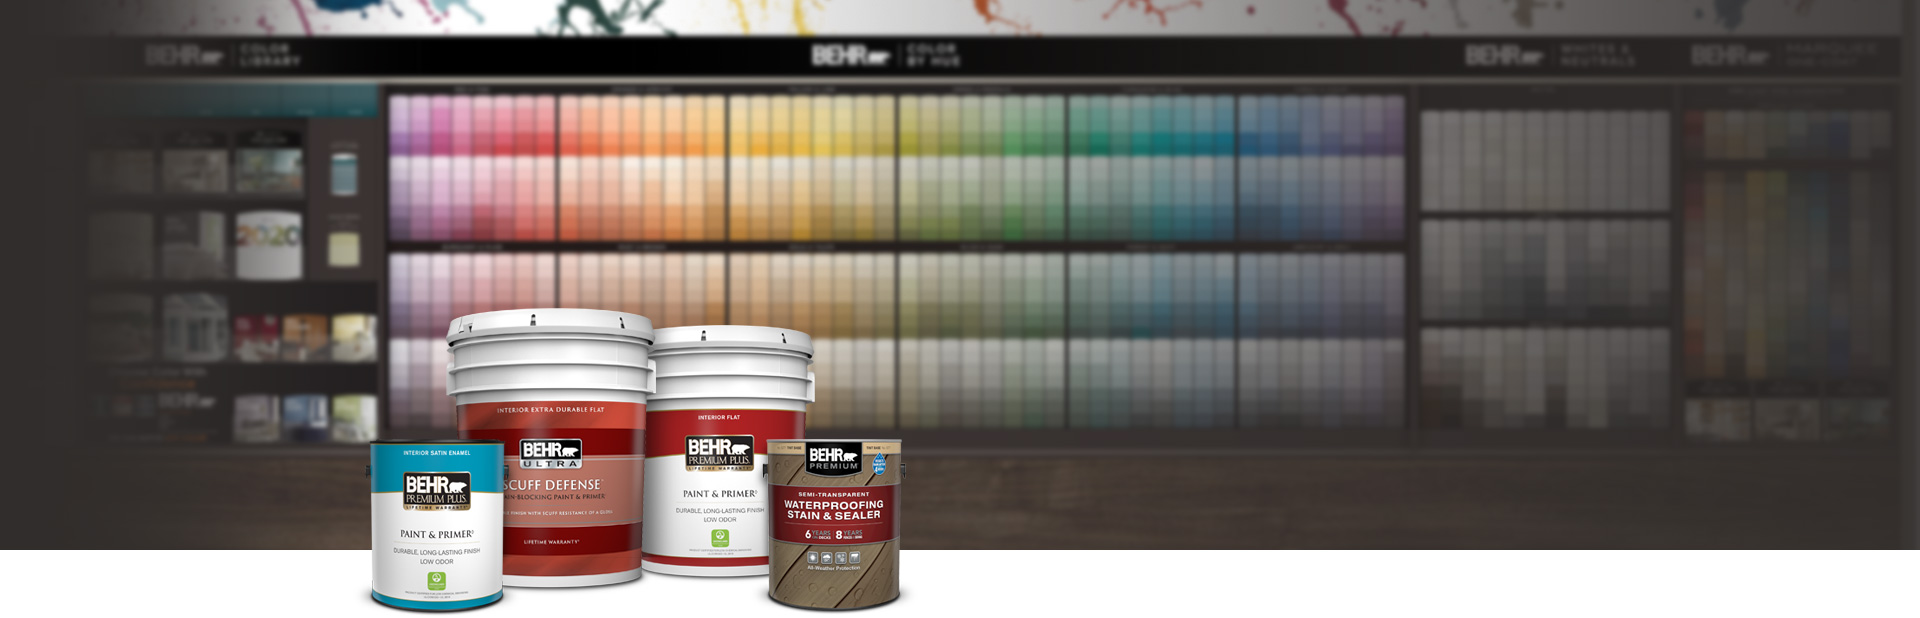 Behr Paint Products in front of the Home Depot Color Solution Center.